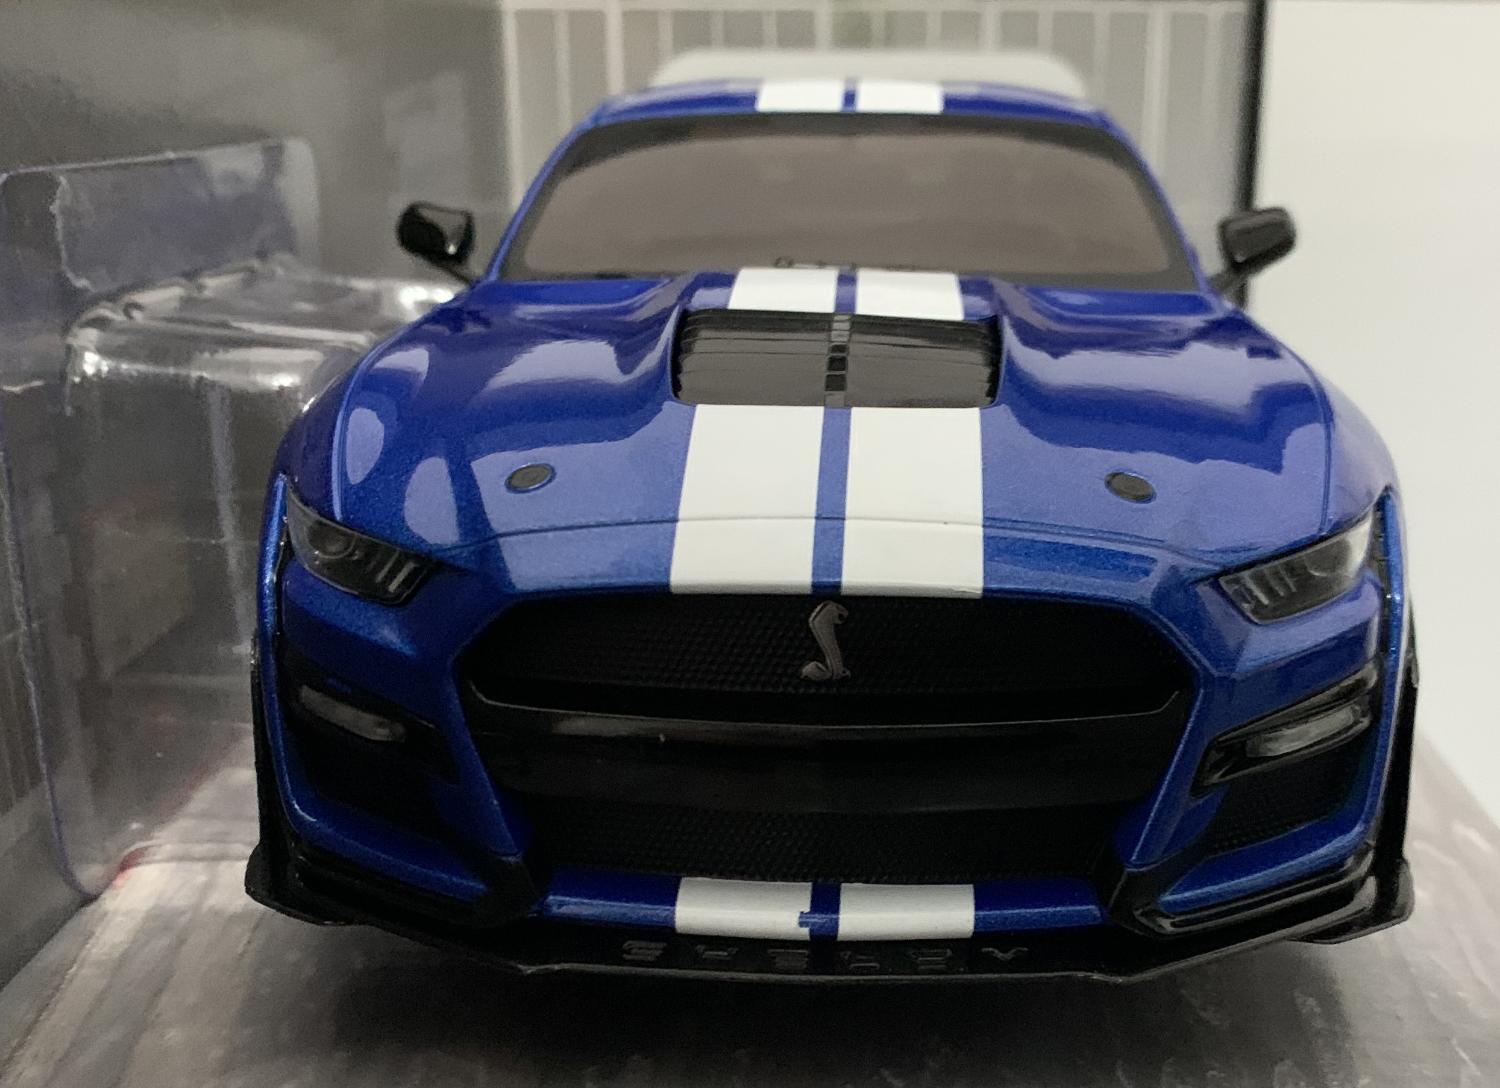 An excellent scale model of the Ford Mustang Shelby GT500 Fast Track with high level of detail throughout, all authentically recreated.  Model is presented in a window display box.  The car is approx. 26 cm long and the presentation box is 34 cm long